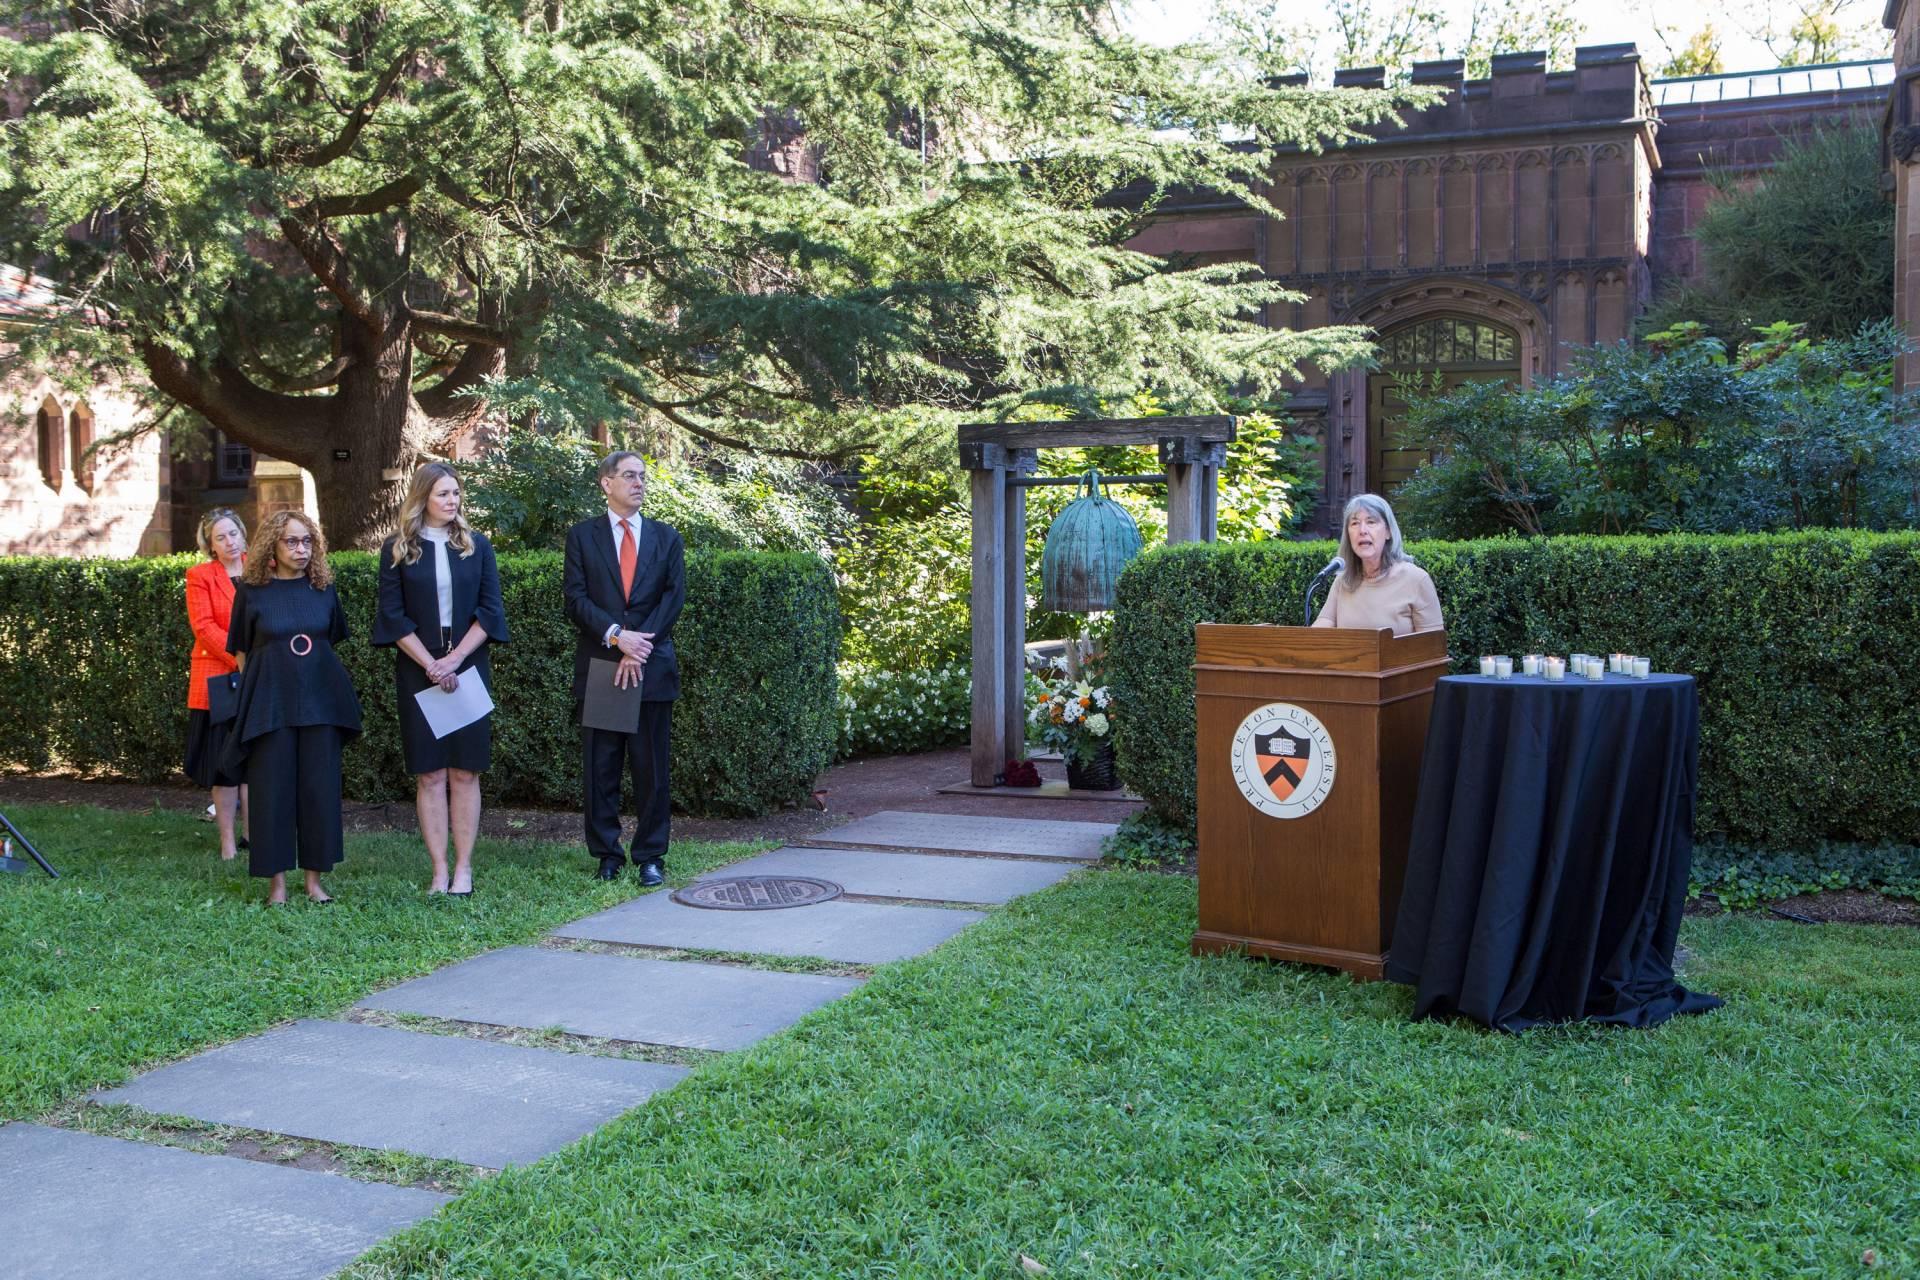 A ceremony was held at the 9/11 garden